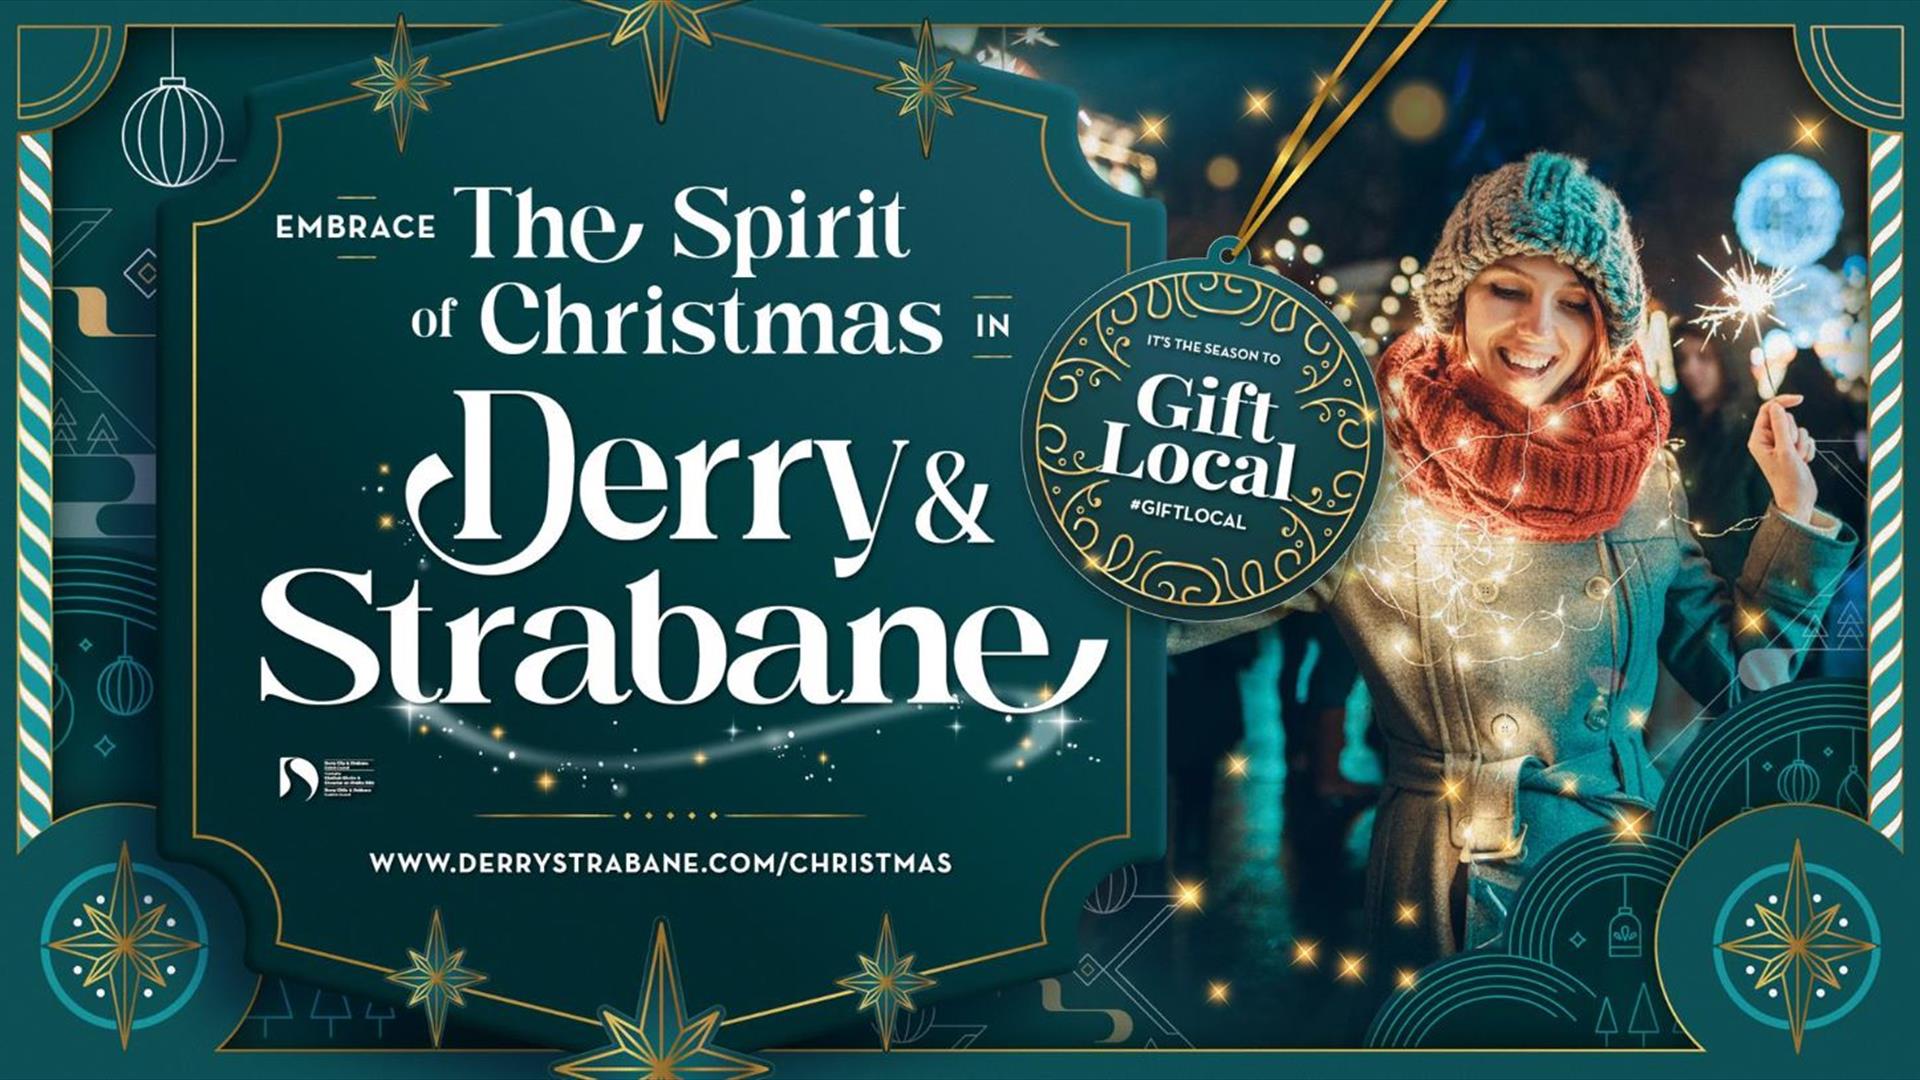 Promotional image for Christmas events in Derry & Strabane.